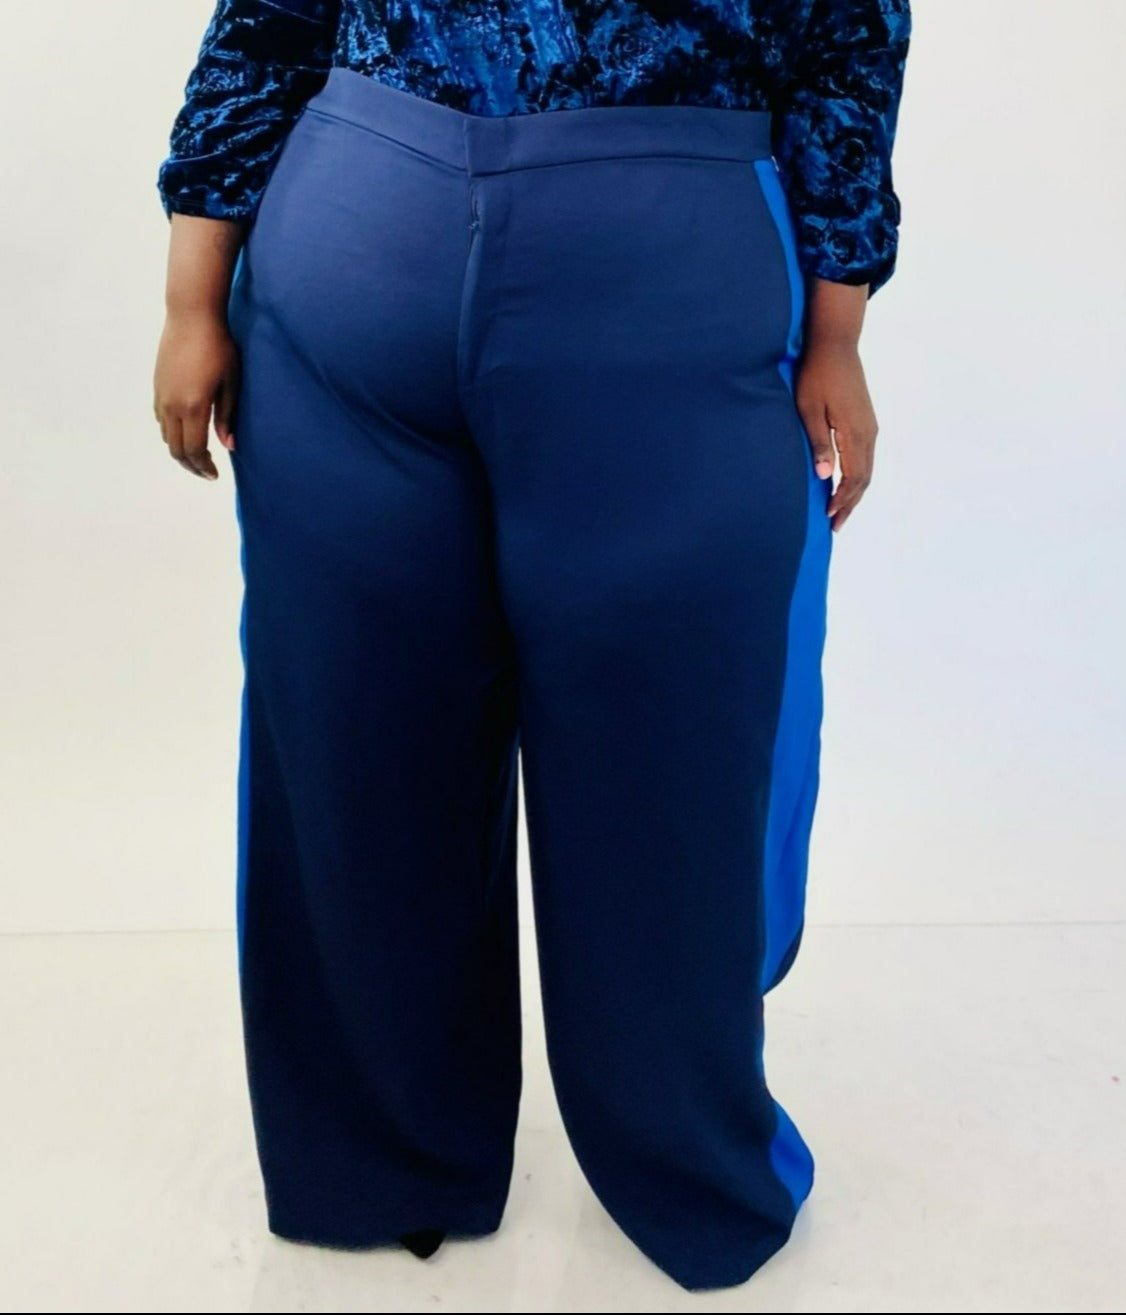 Shop for Size 26 | Trousers | Sale | online at Freemans